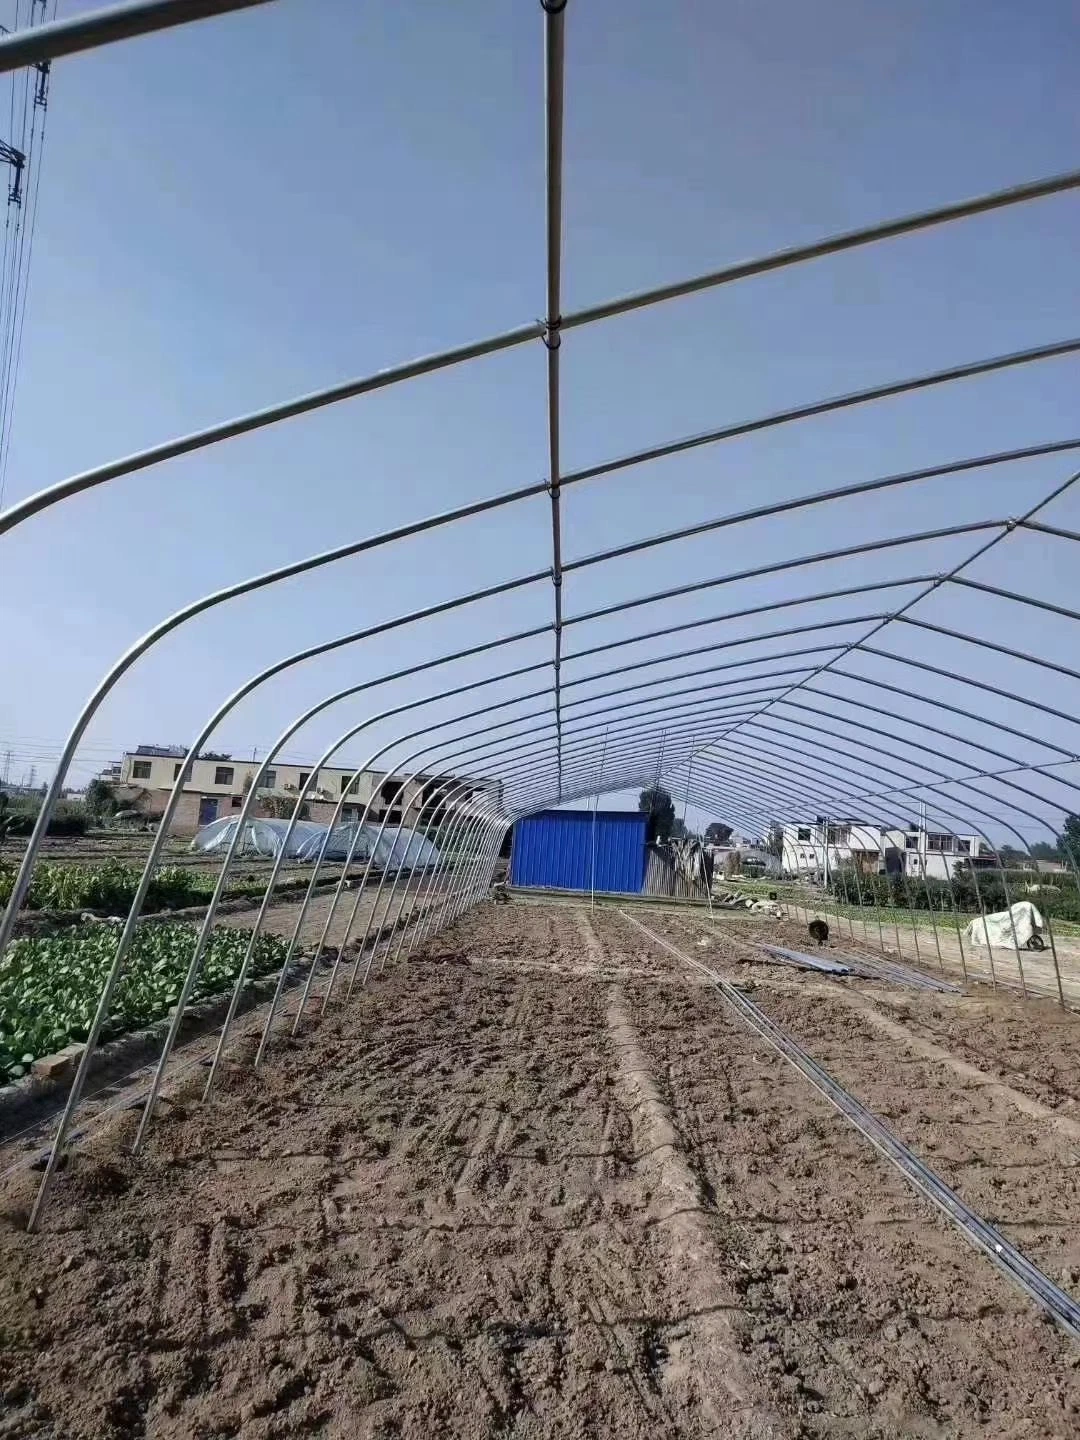 Smart Agricultural Multi Span Arch-Type Film PE/Po Greenhouse for Vertical Farming Agriculture of Vegetables/Flowers/Tomato/Garden with Hydroponics System